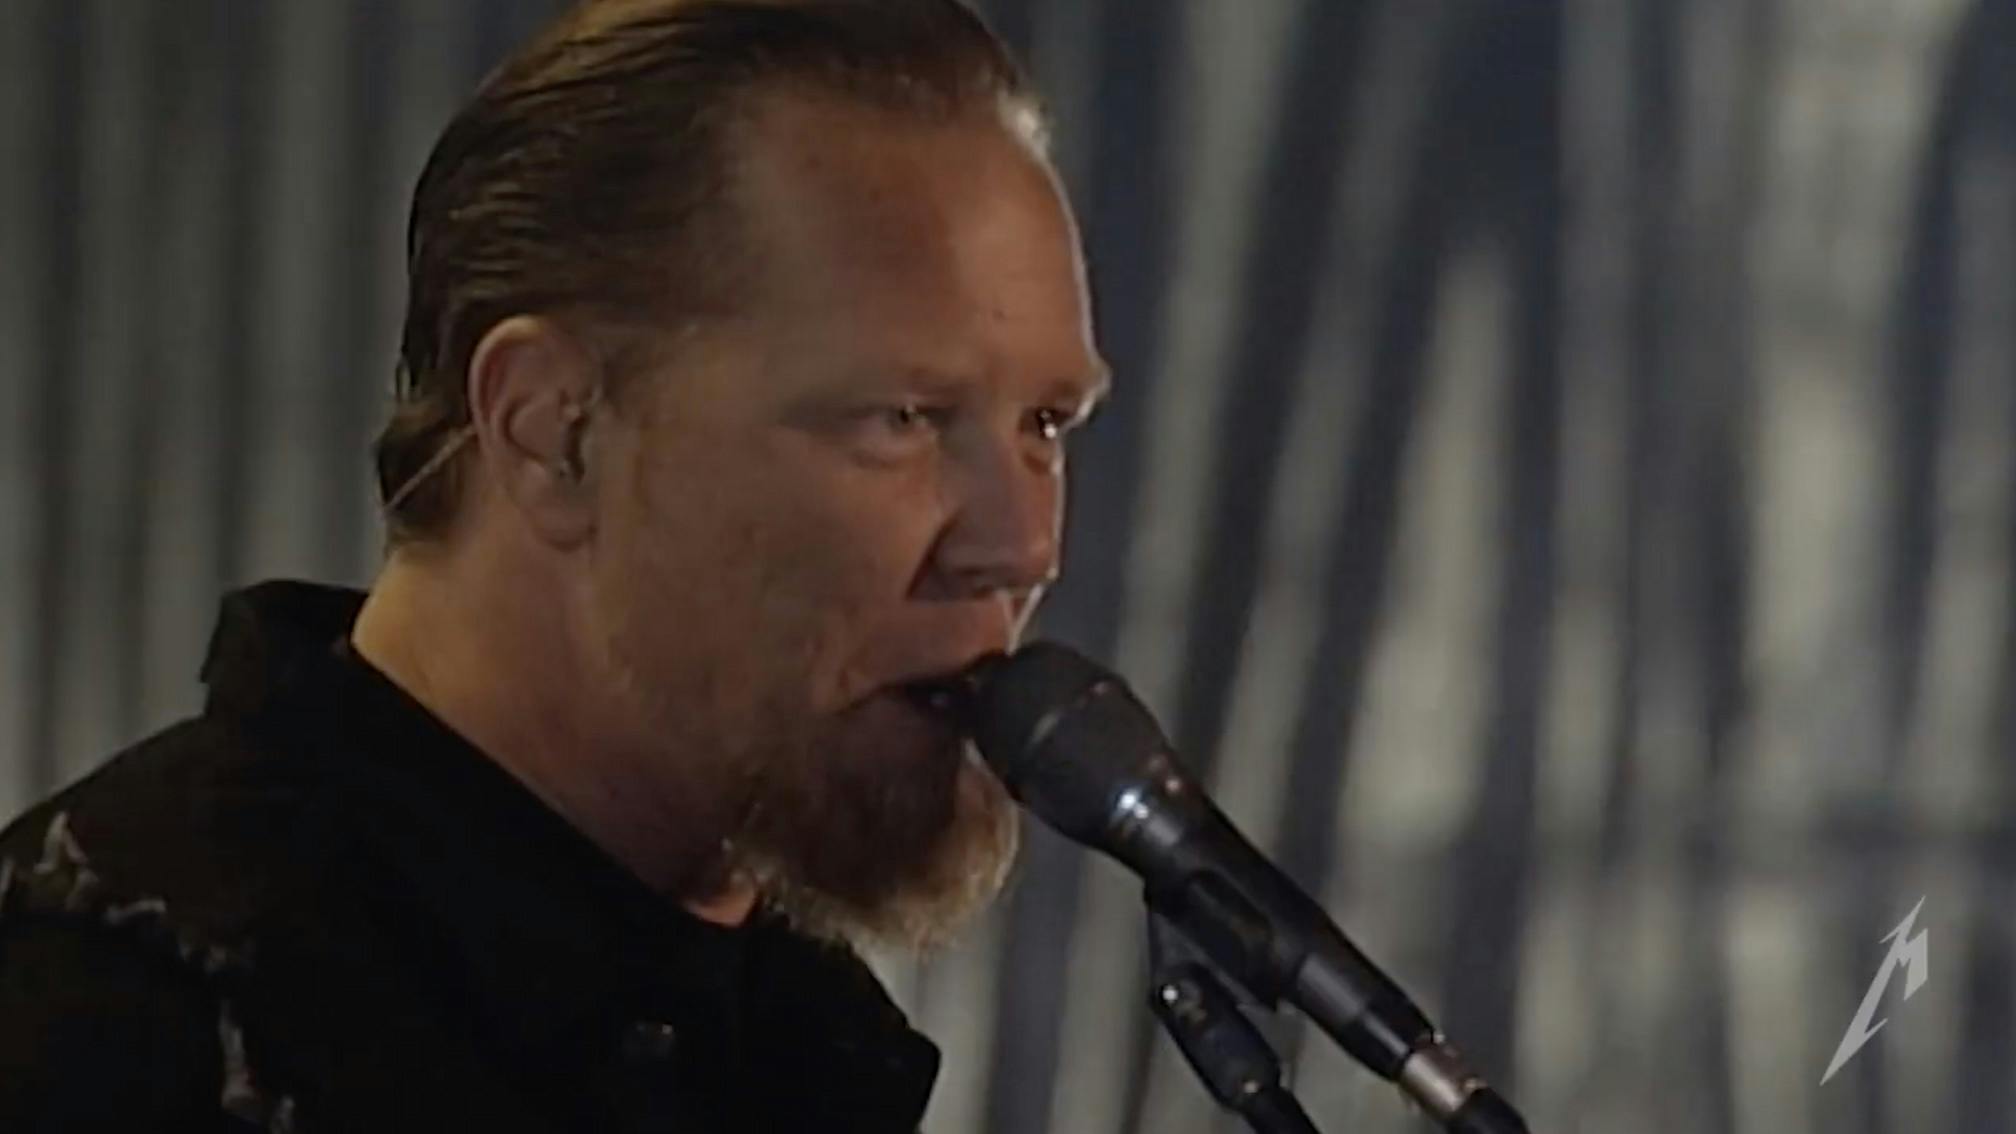 Watch Metallica Perform A Fantastic "Unique" Setlist In Spain From 2008